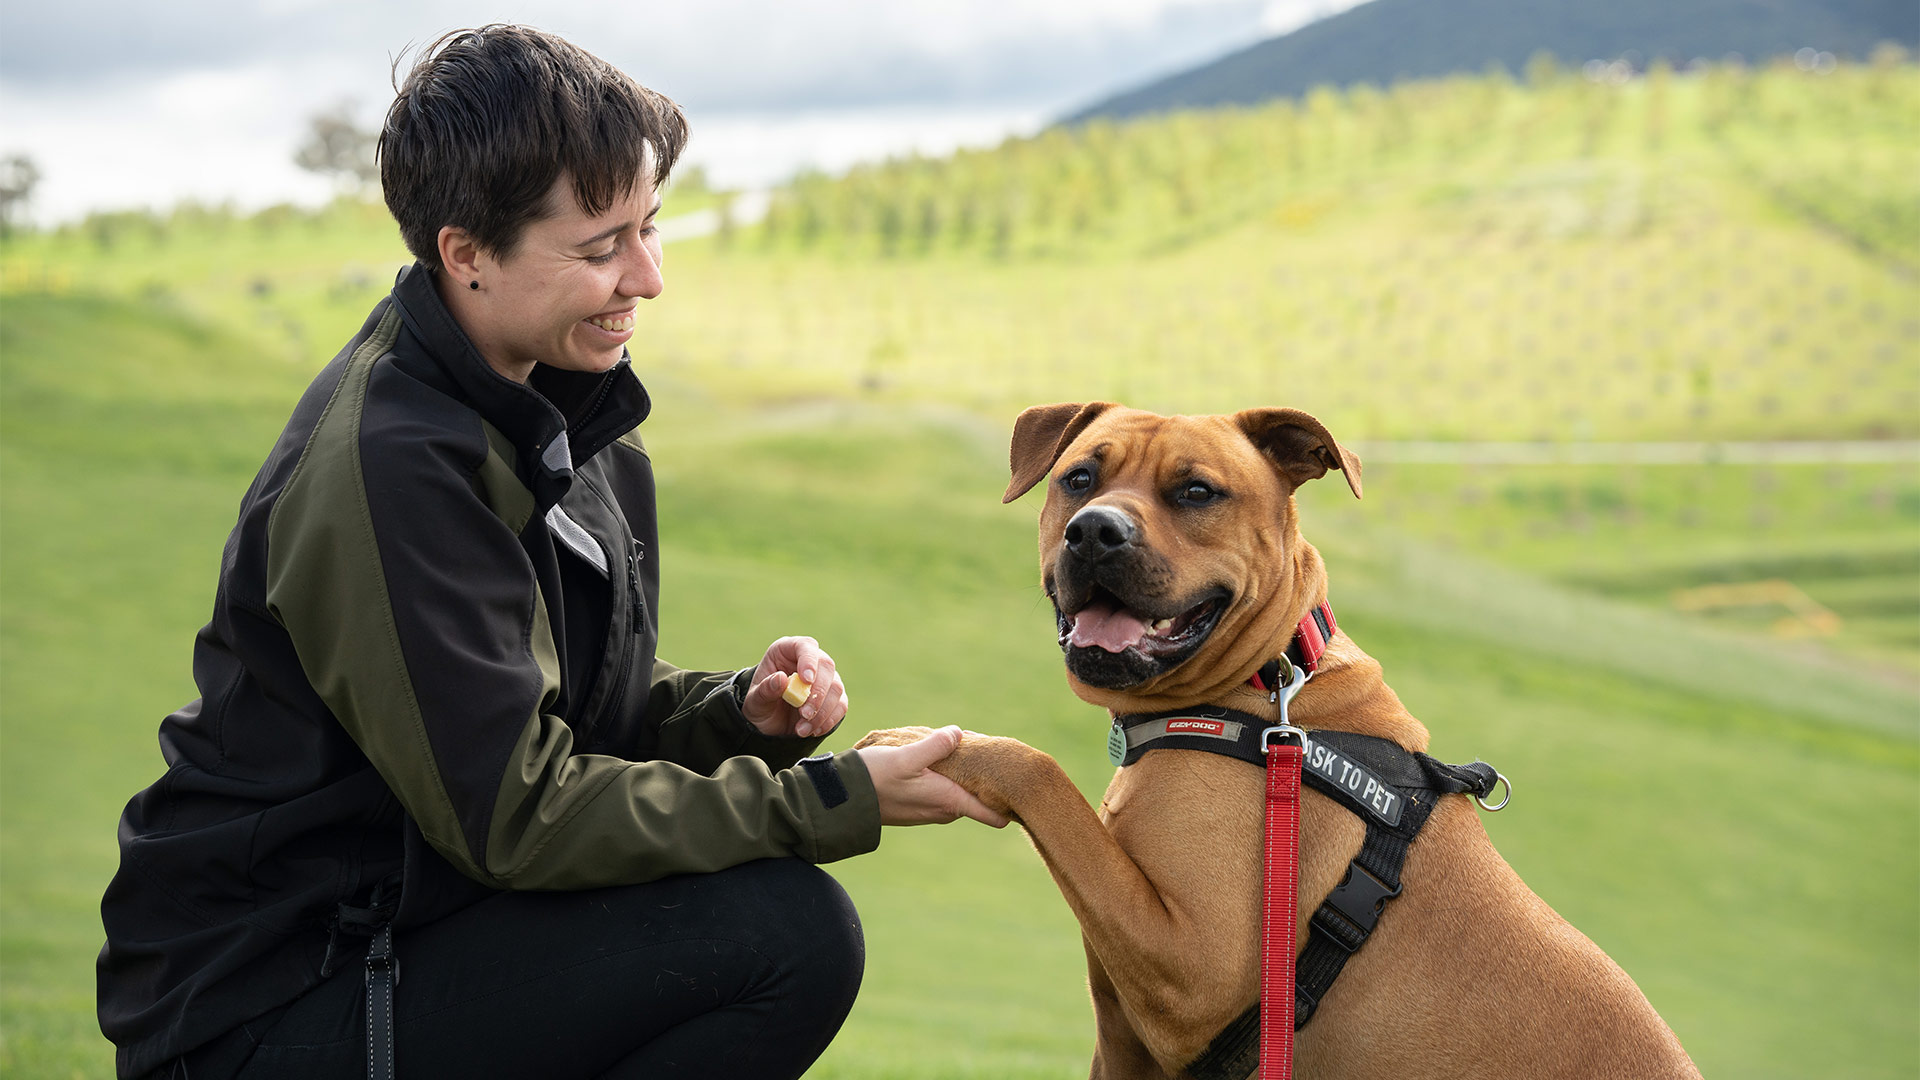 A woman looks at a dog, who is looking at the camera. She holds the dog's paw. There is green grass and trees in the background.